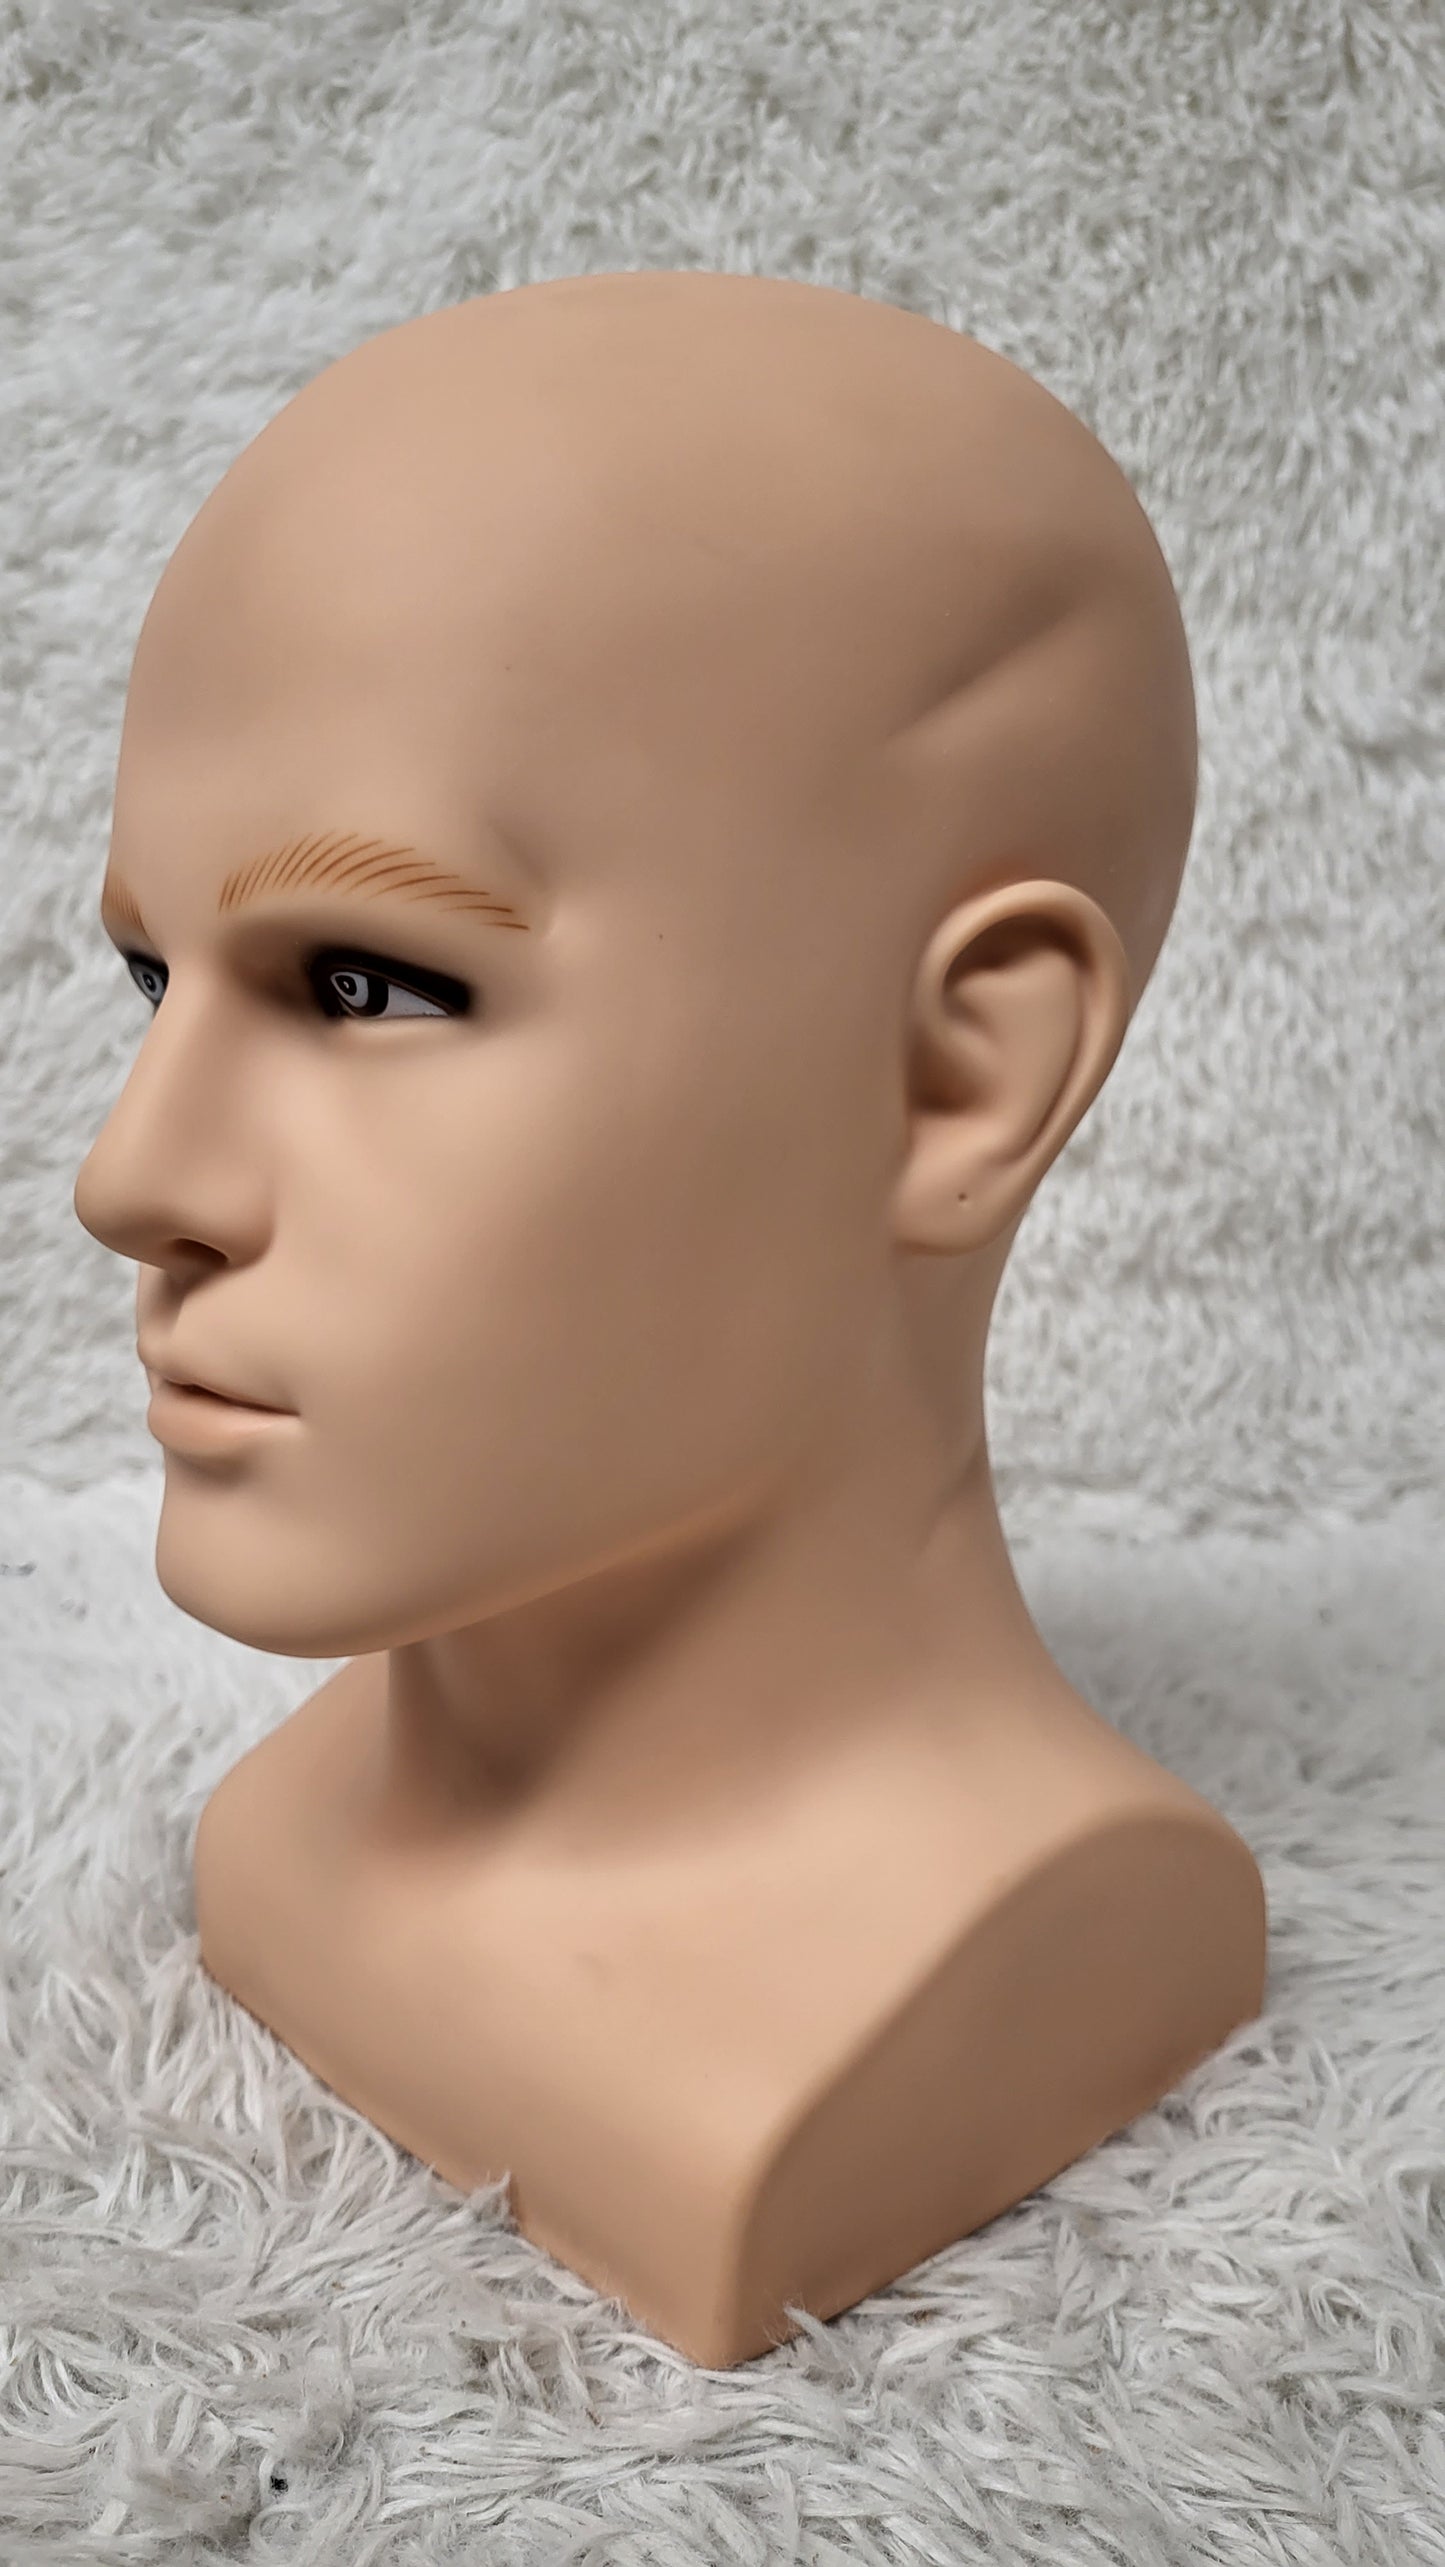 Mannequin Heads For Wigs Male Mannequin Head For Hair/Mask Display Man